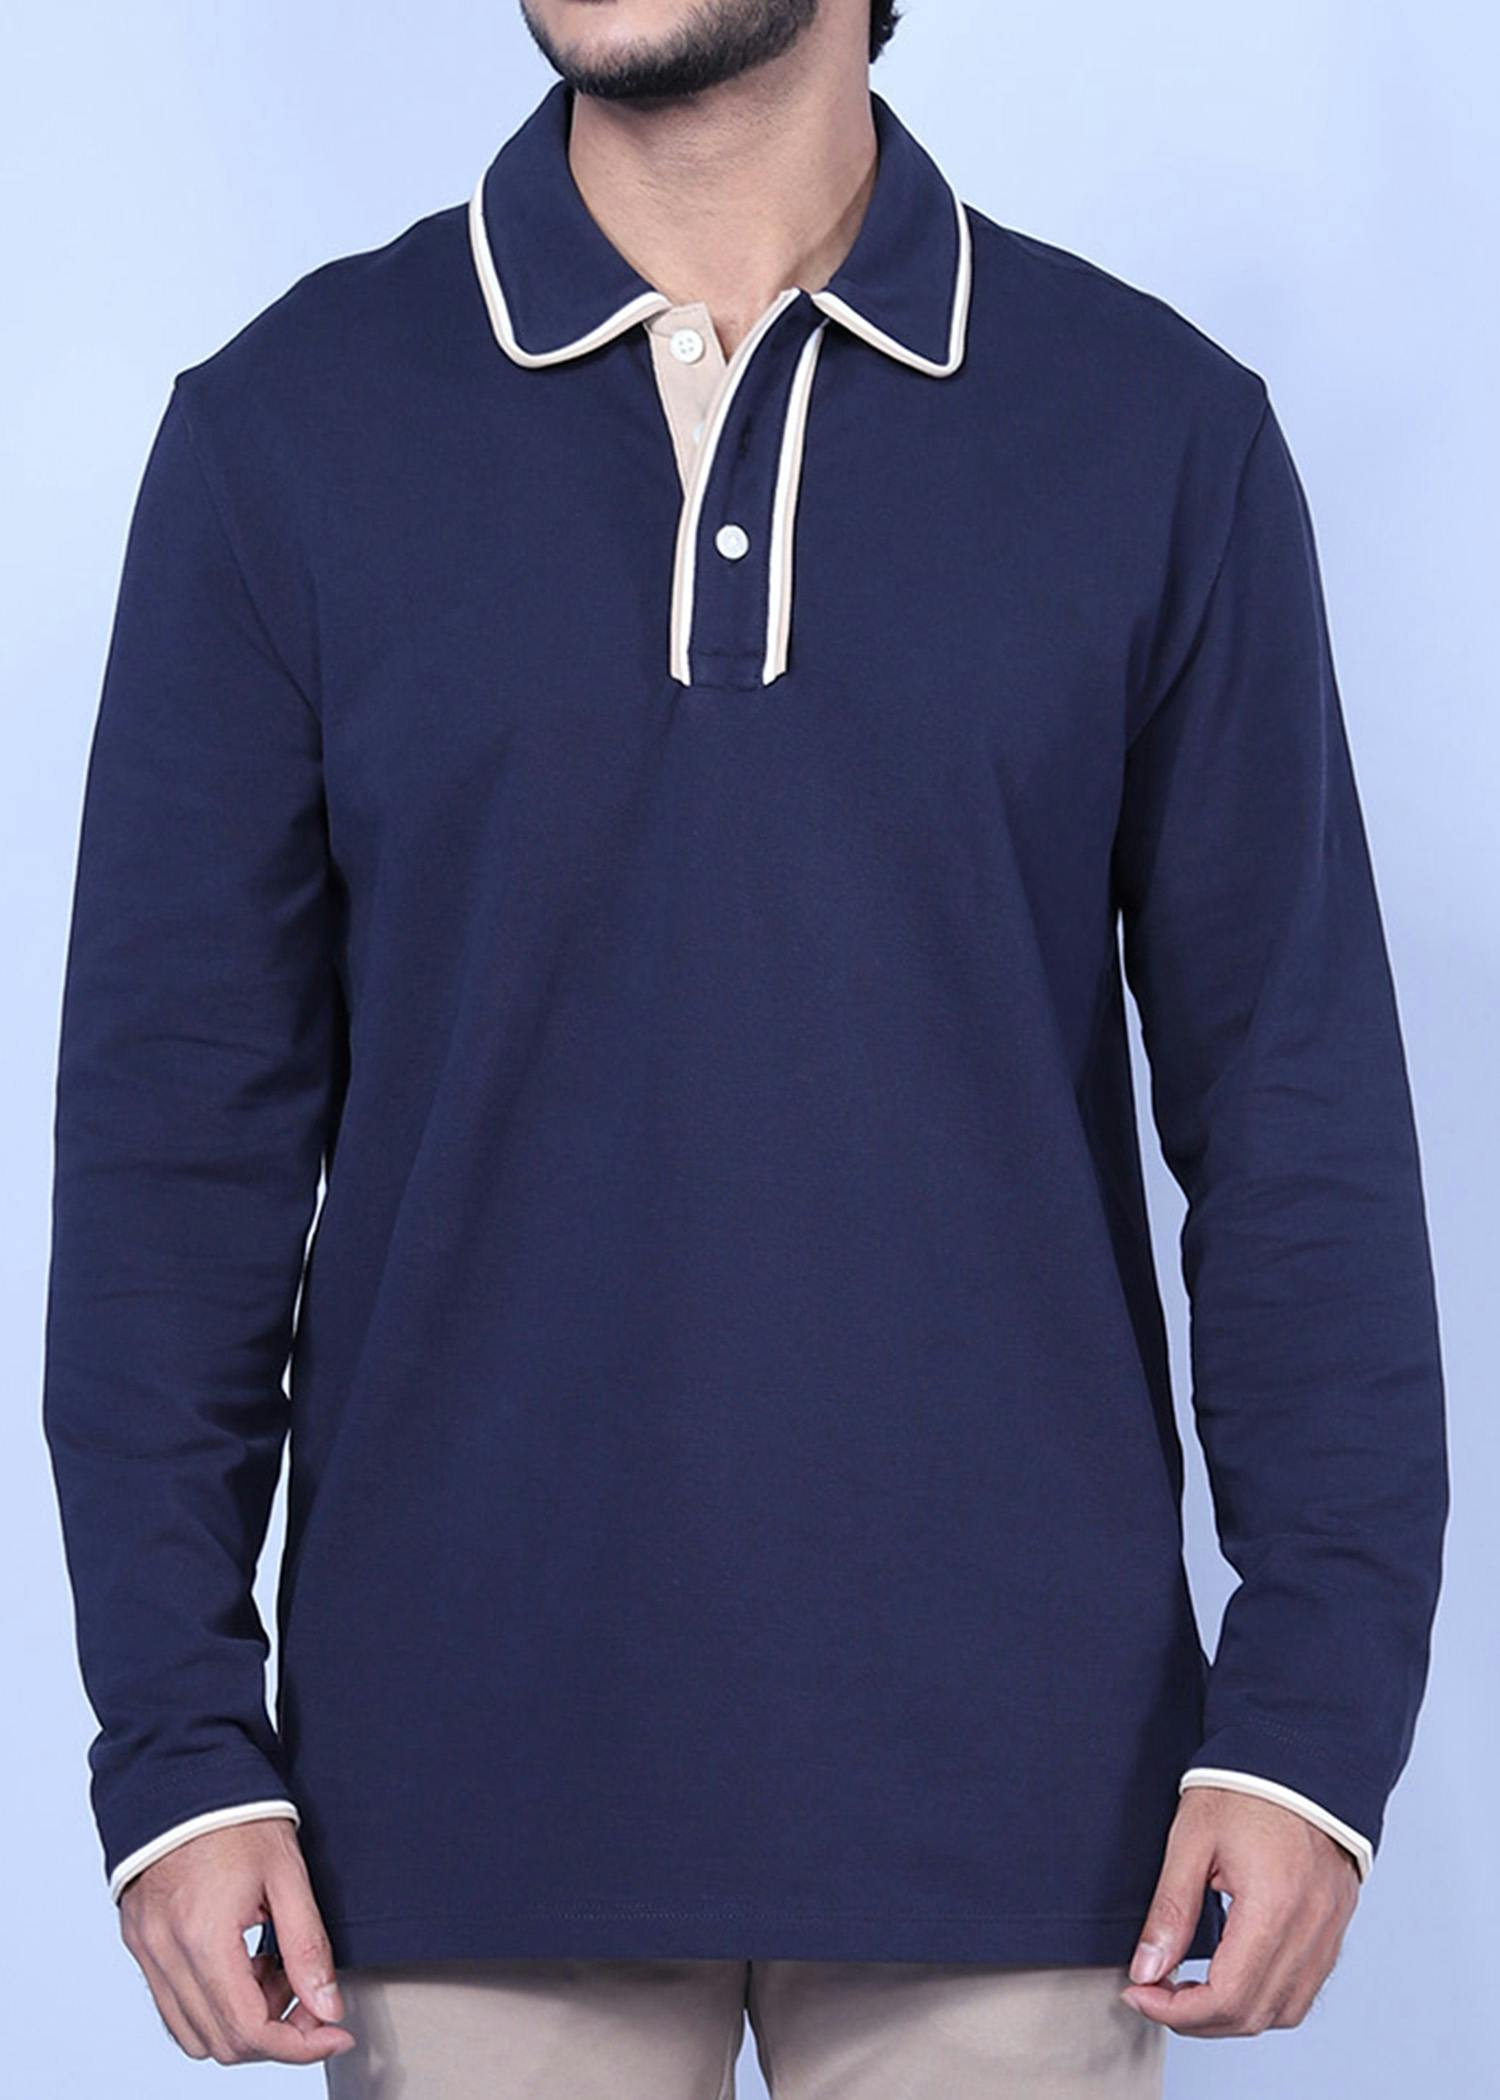 rome ls polo navy color headcropped